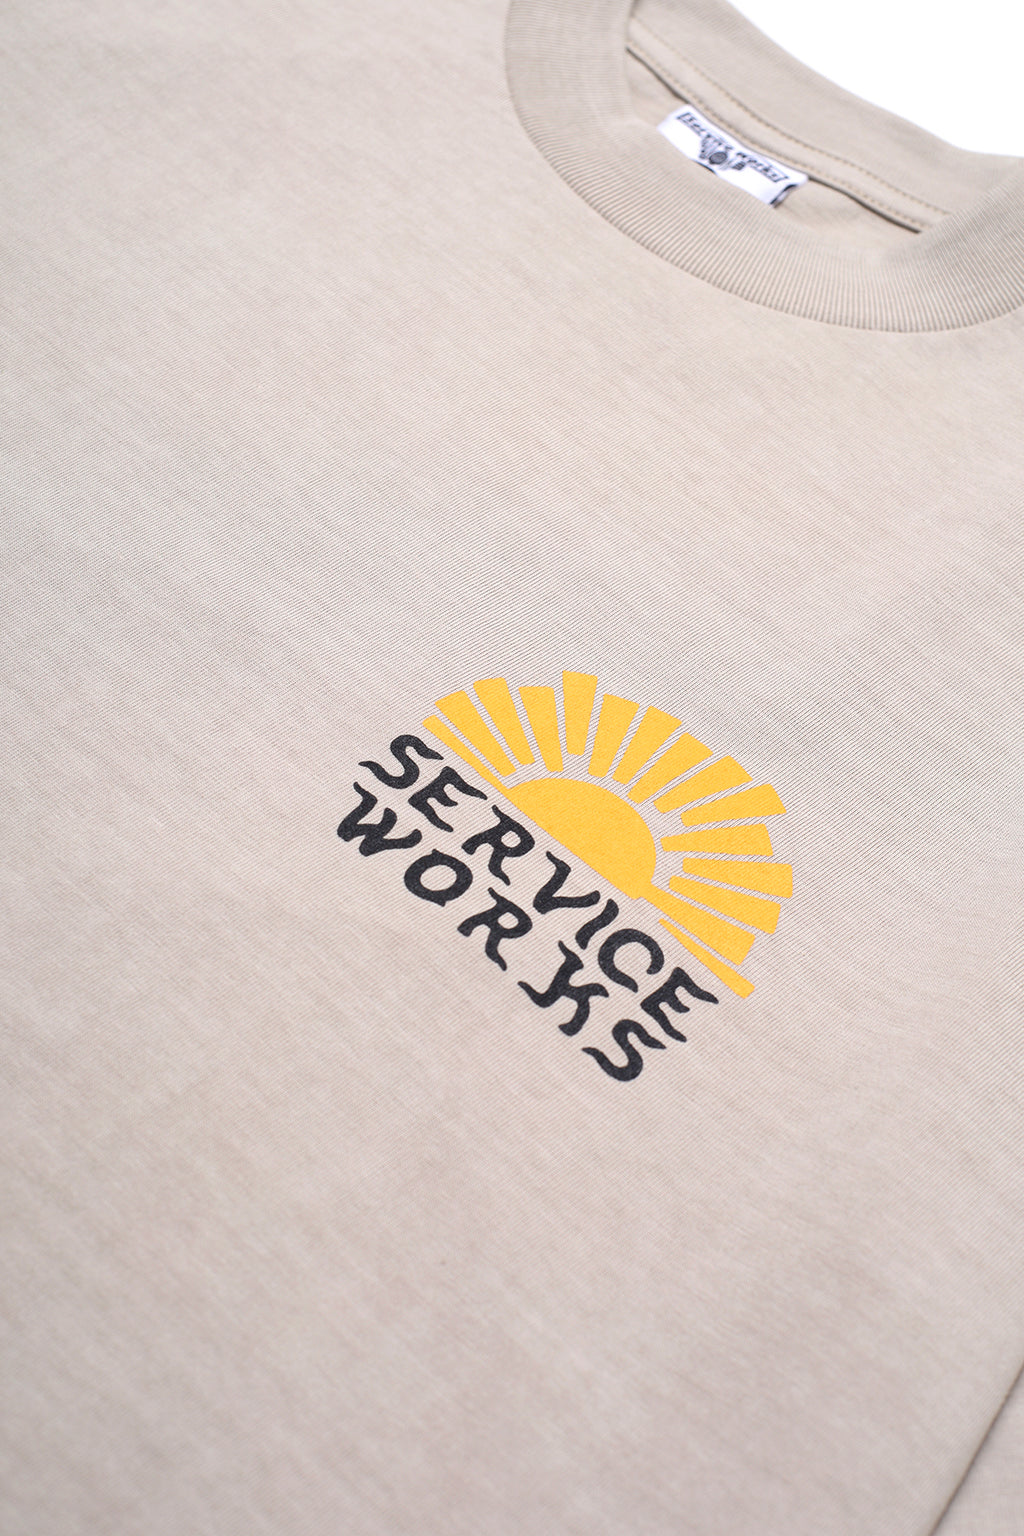 Service Works - Sunny Side Up Tee - Stone